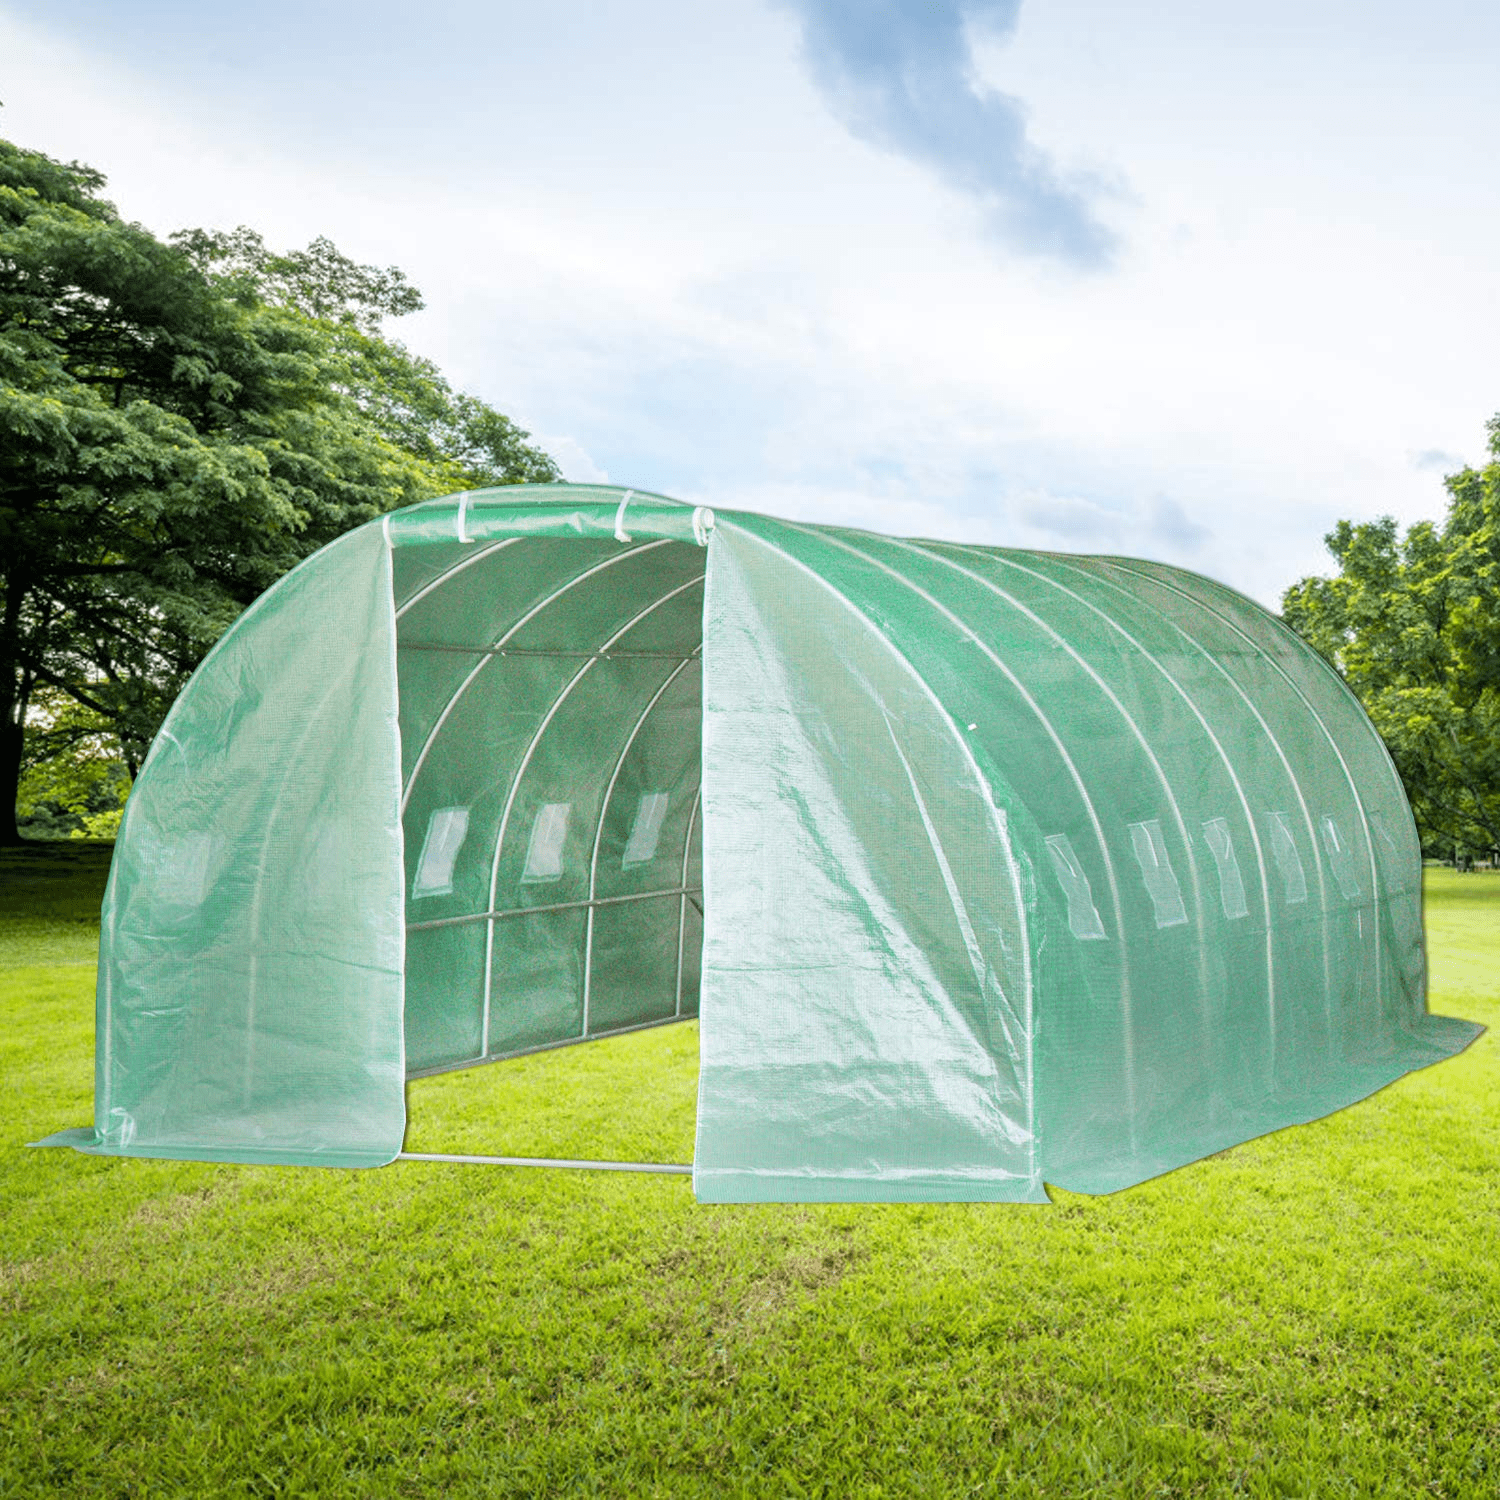 Oarlike Greenhouses for Outdoor 10x7x7FT Large Hot House for Garden Plant w/ Heavy Duty Galvanized Steel Frame Portable Walk-in Tunnel Tent 